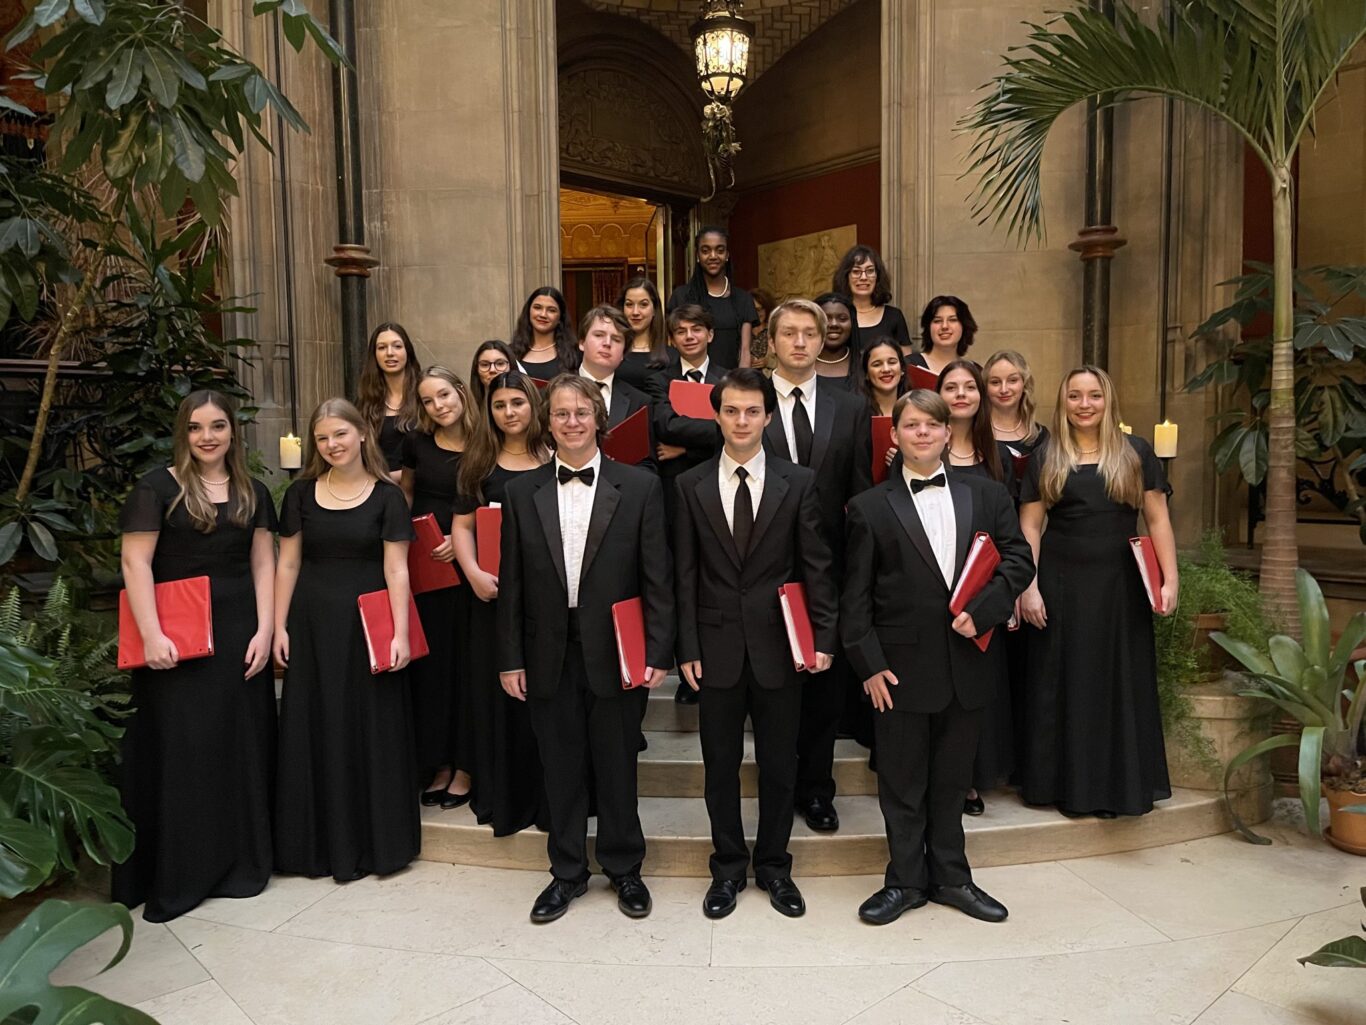 Members of the Prov Chorale, dressed in black tuxedos, posing for a photo at Carnegie Hall.